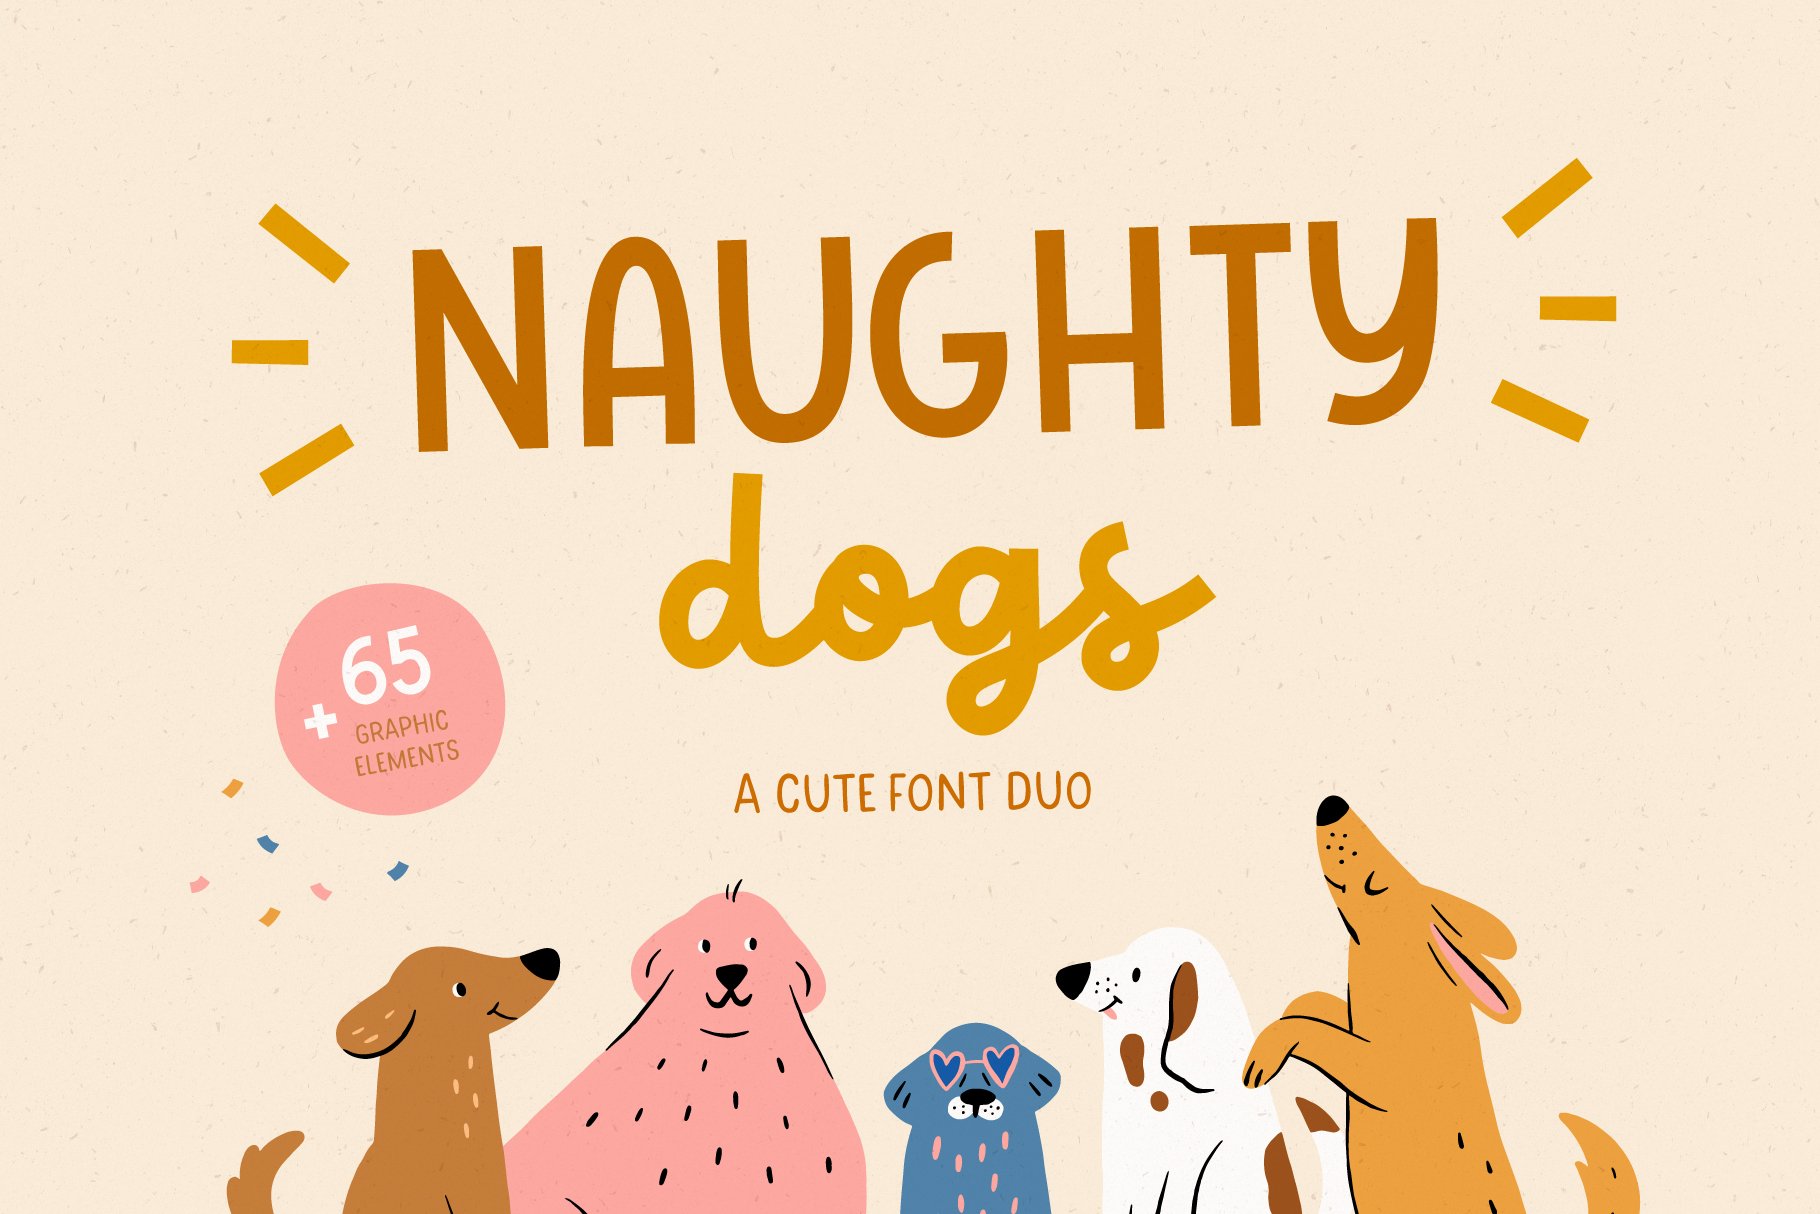 Naughty dogs | Font duo cover image.